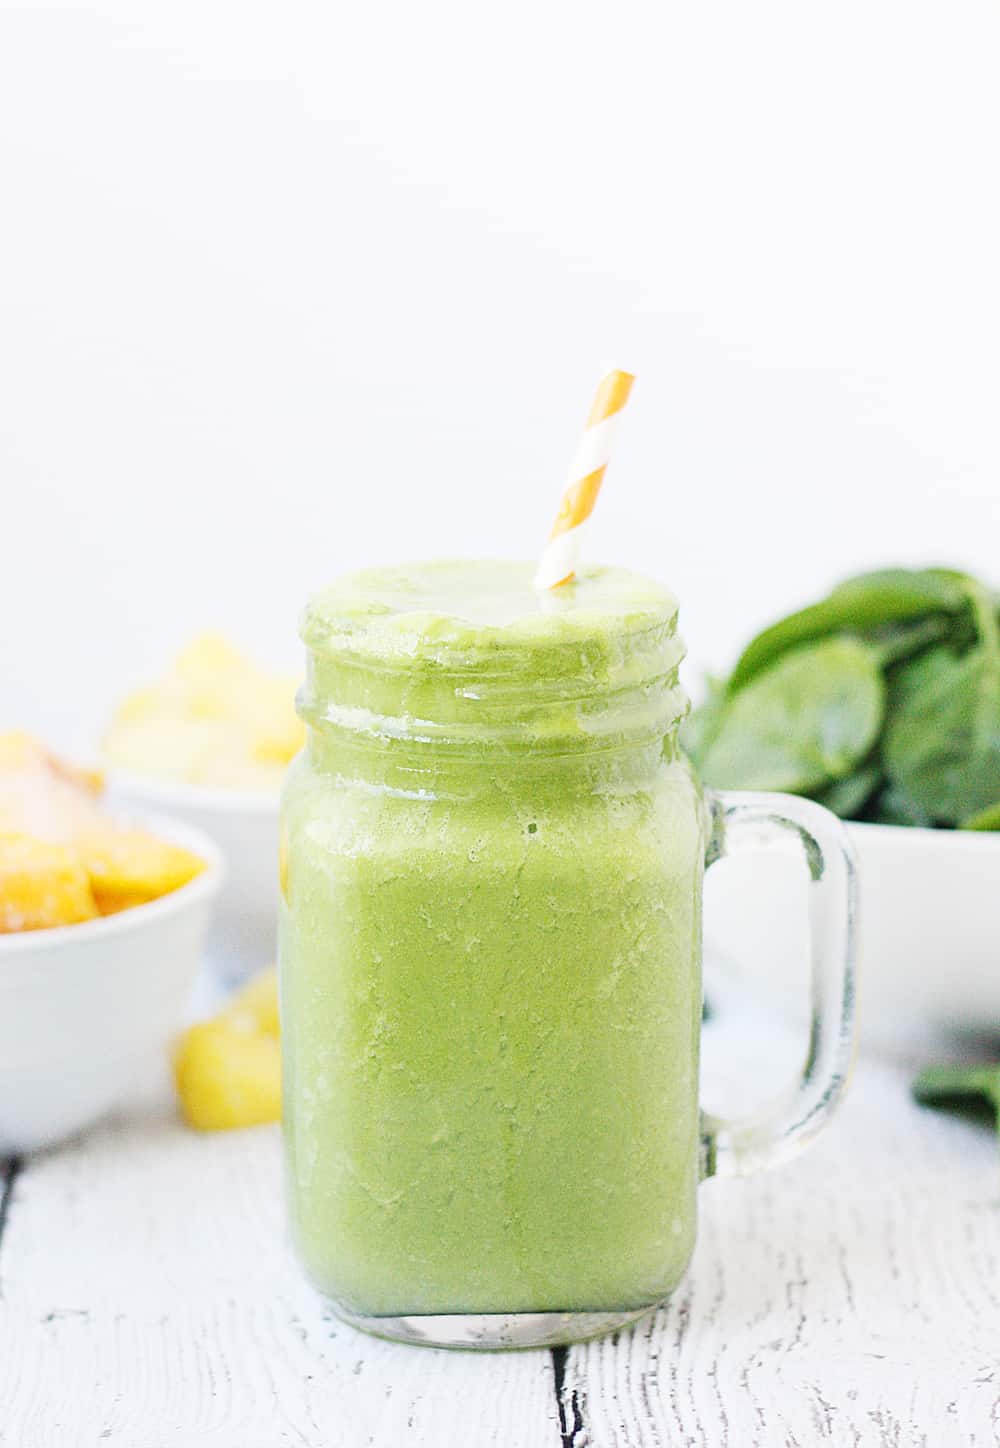 Pineapple Peach Green Smoothie -- This pineapple peach green smoothie is packed with good-for-you ingredients and good-for-your-taste-buds flavor. Frozen pineapple and peaches make it sweet while spinach and protein make it extra healthy! | halfscratched #ad #smoothie #recipe #drink